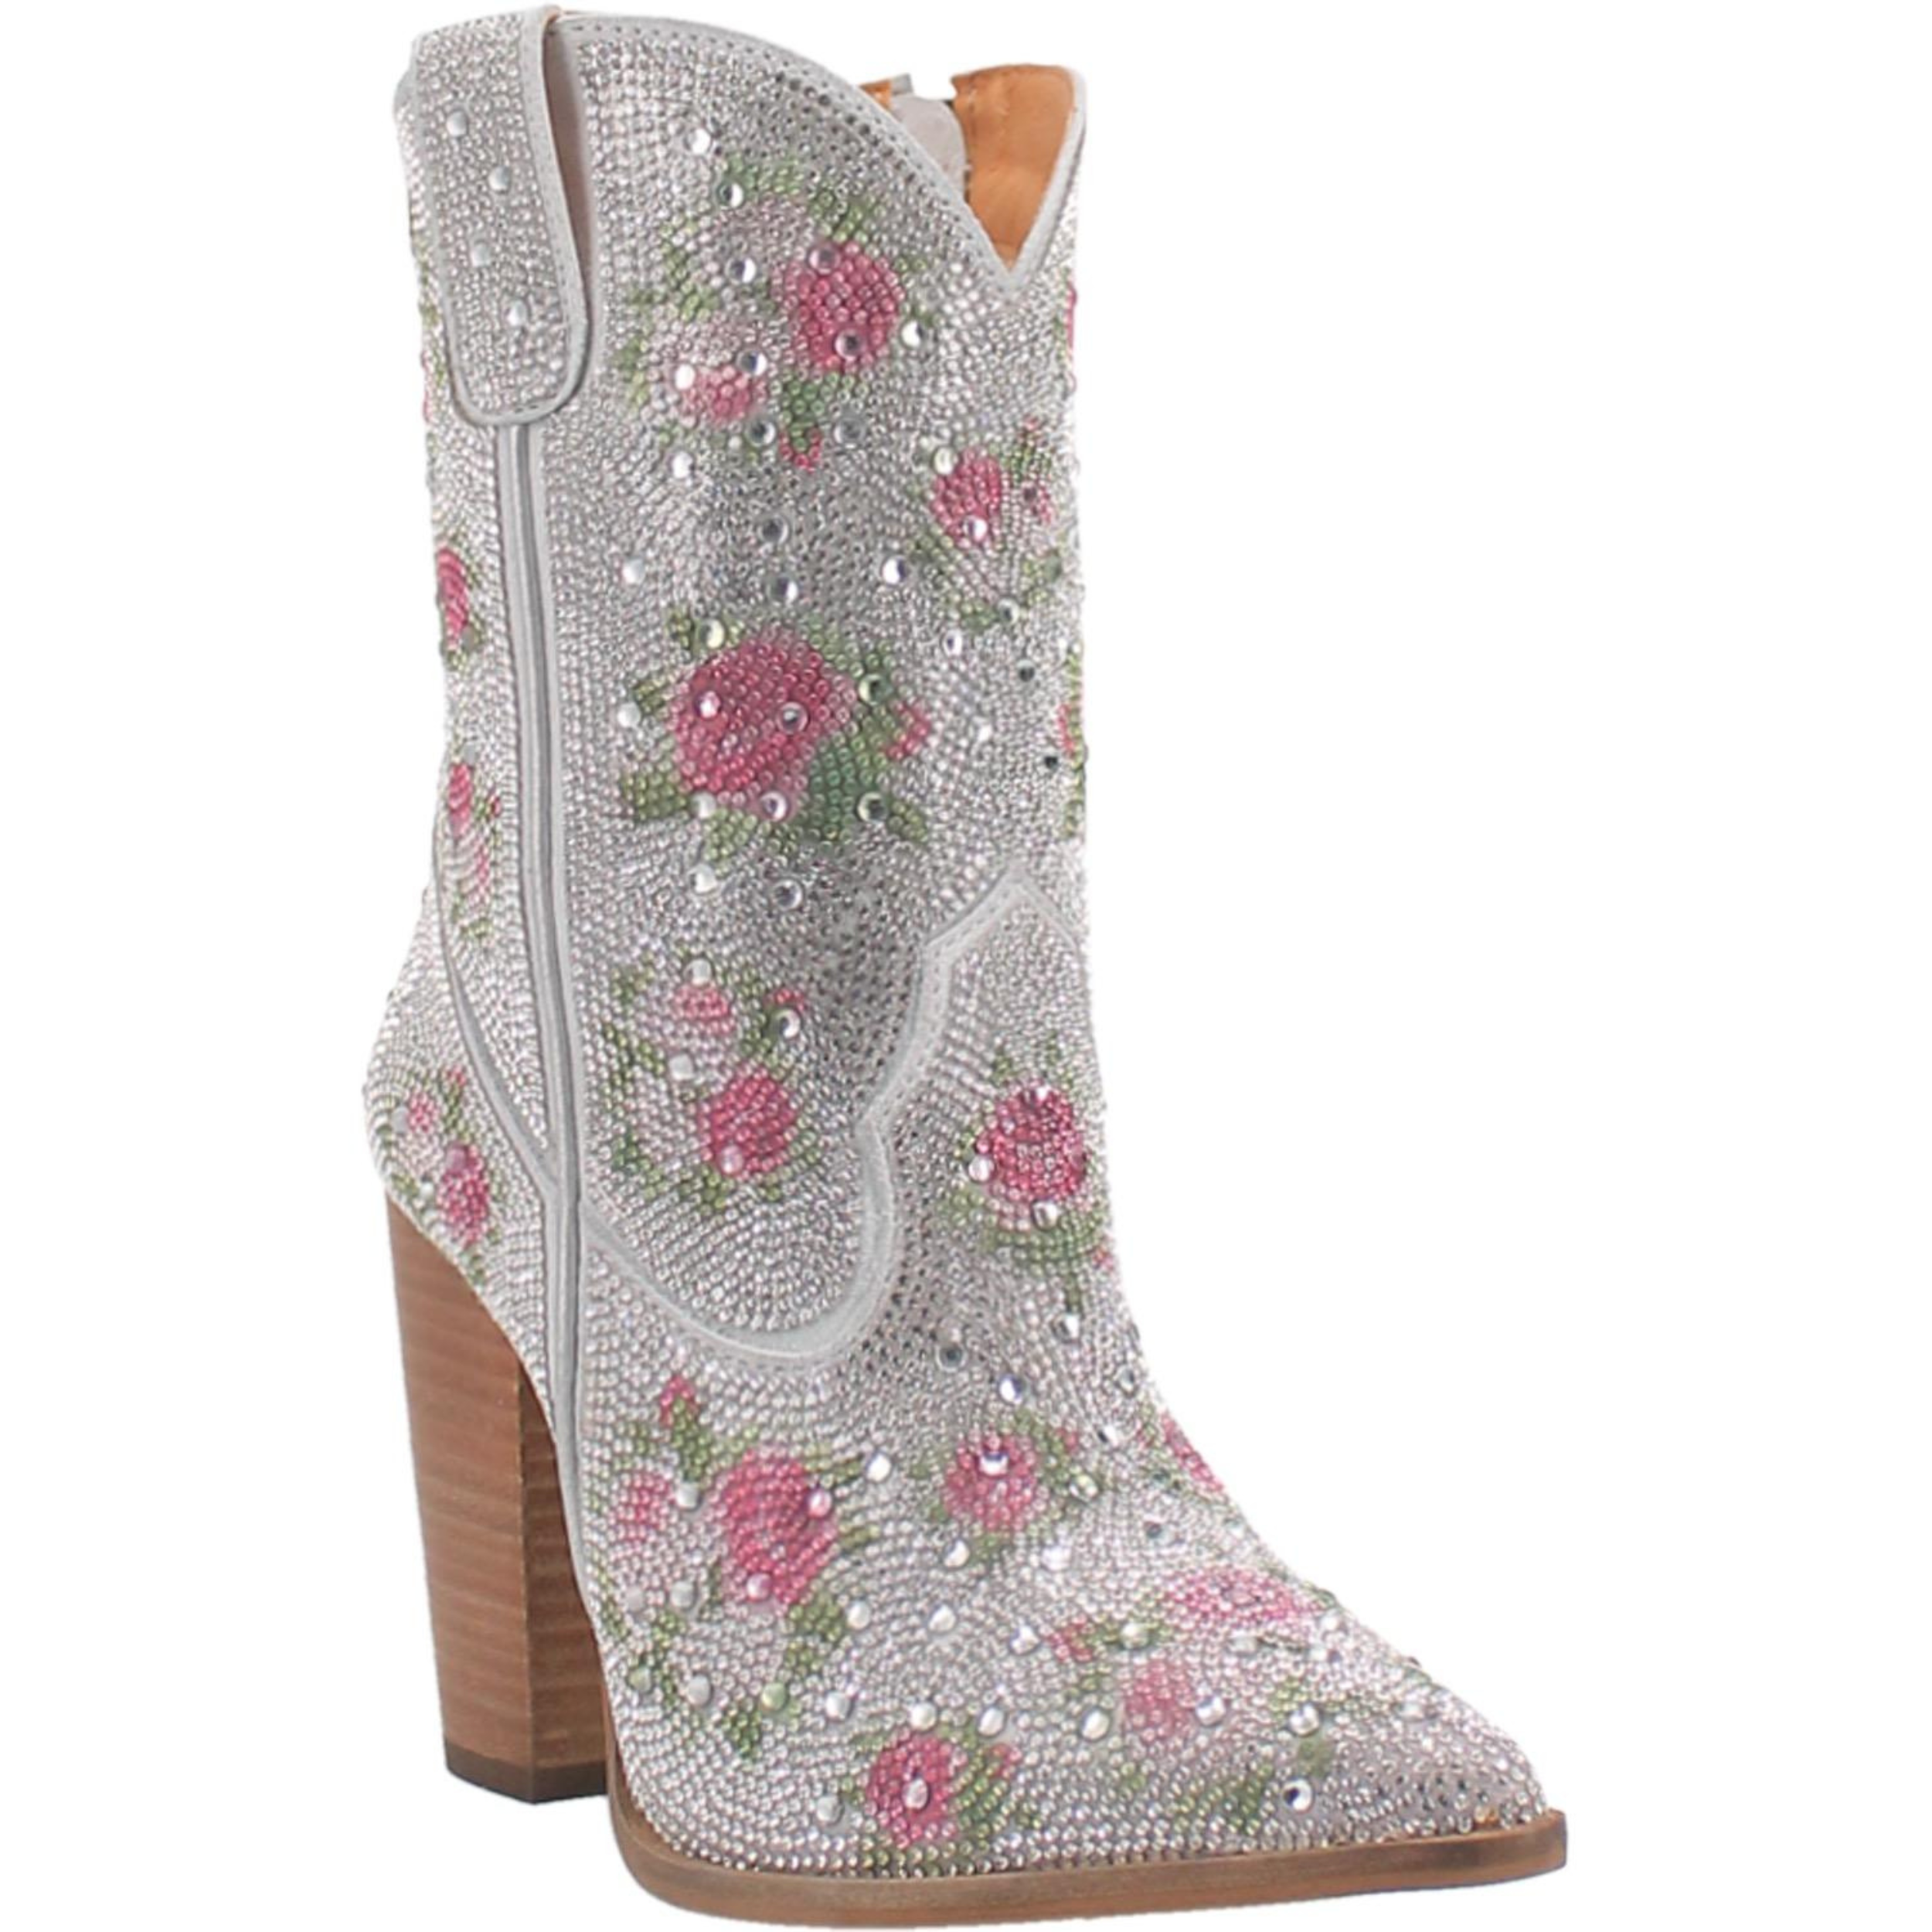 A small boot with a tall heel, rhinestones from top to bottom, pink rhinestone flowers with green rhinestone leaves, bedazzled straps, and V cut at the top. Item is pictured on a plain white background